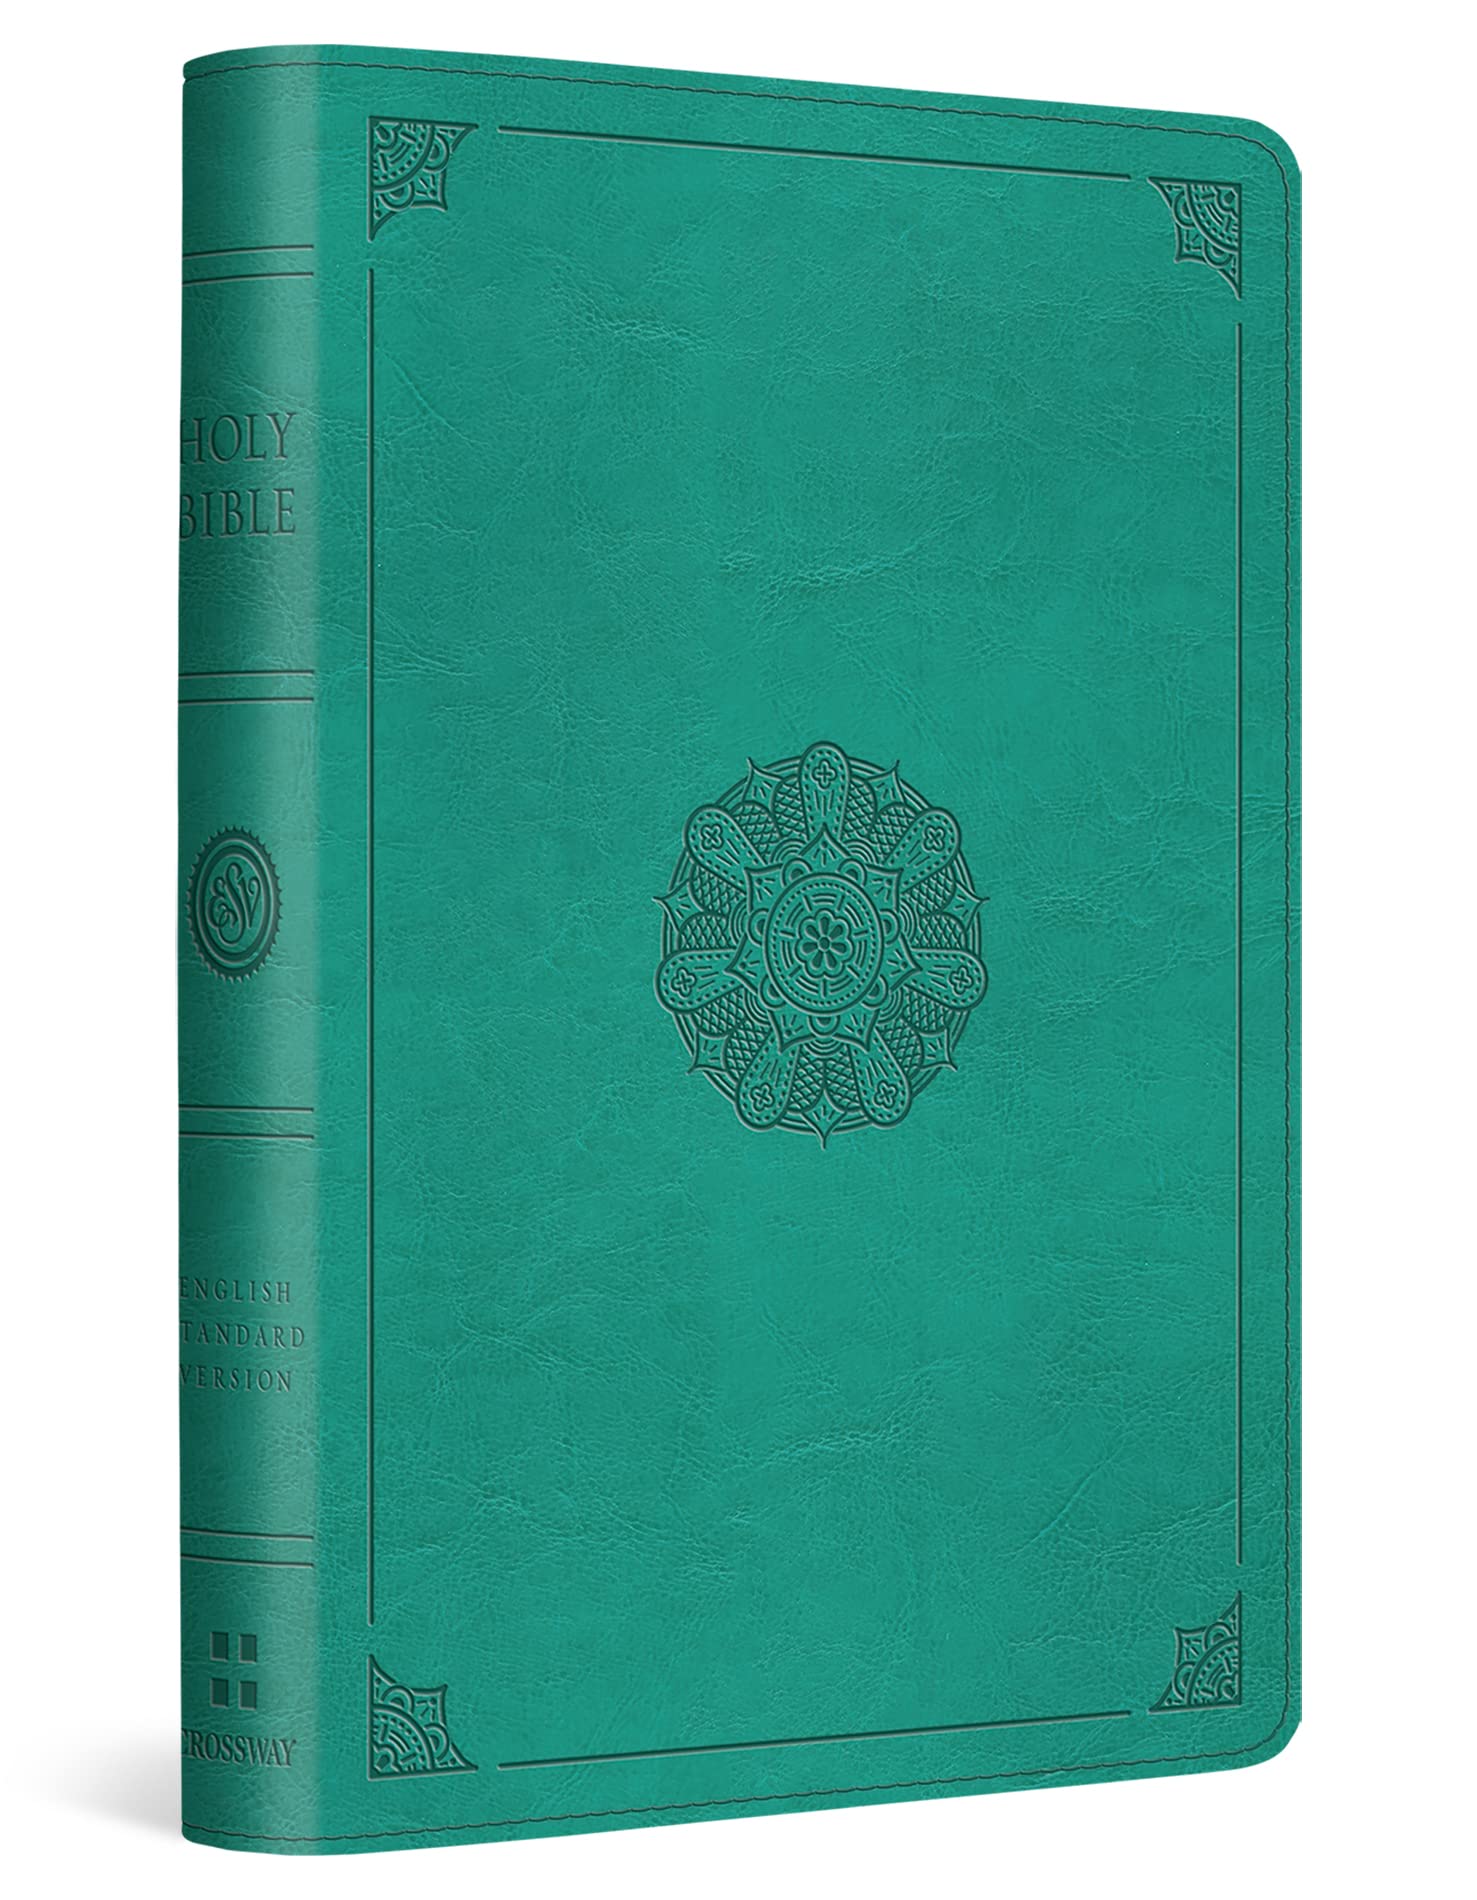 ESV Compact Bible (TruTone, Turquoise, Emblem Design) - Living Waters ...